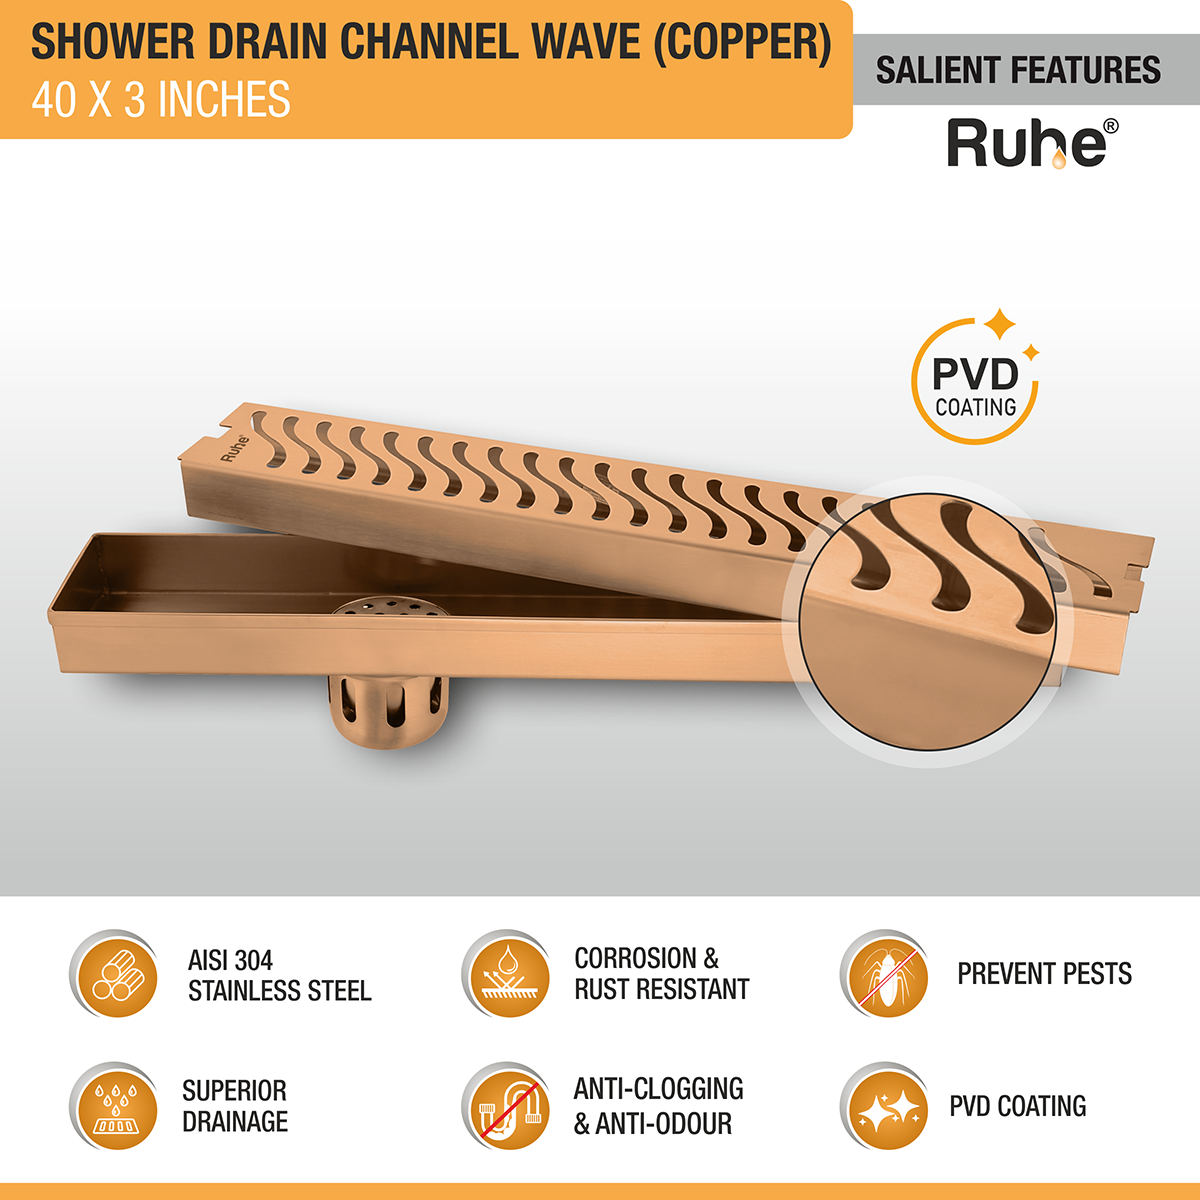 Wave Shower Drain Channel (40 x 3 Inches) ROSE GOLD/ANTIQUE COPPER features